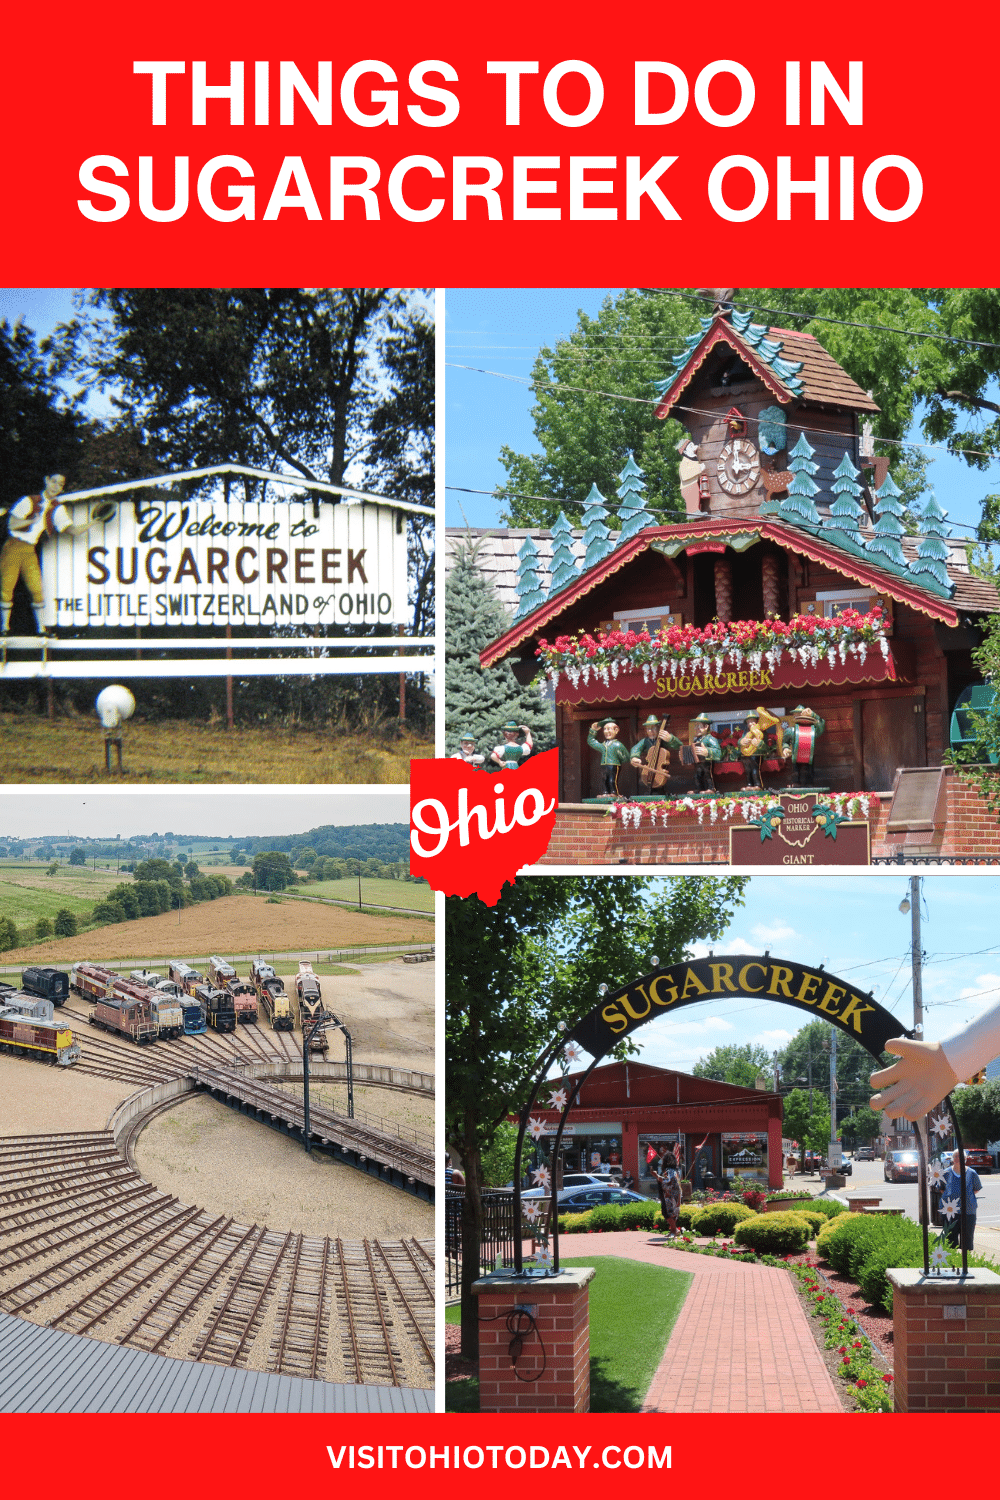 Sugarcreek is a small community that is based in Tuscarawas County, Ohio. This area is in the middle of Amish country and it is also known as “Little Switzerland”. There are lots of things to do in Sugarcreek Ohio.